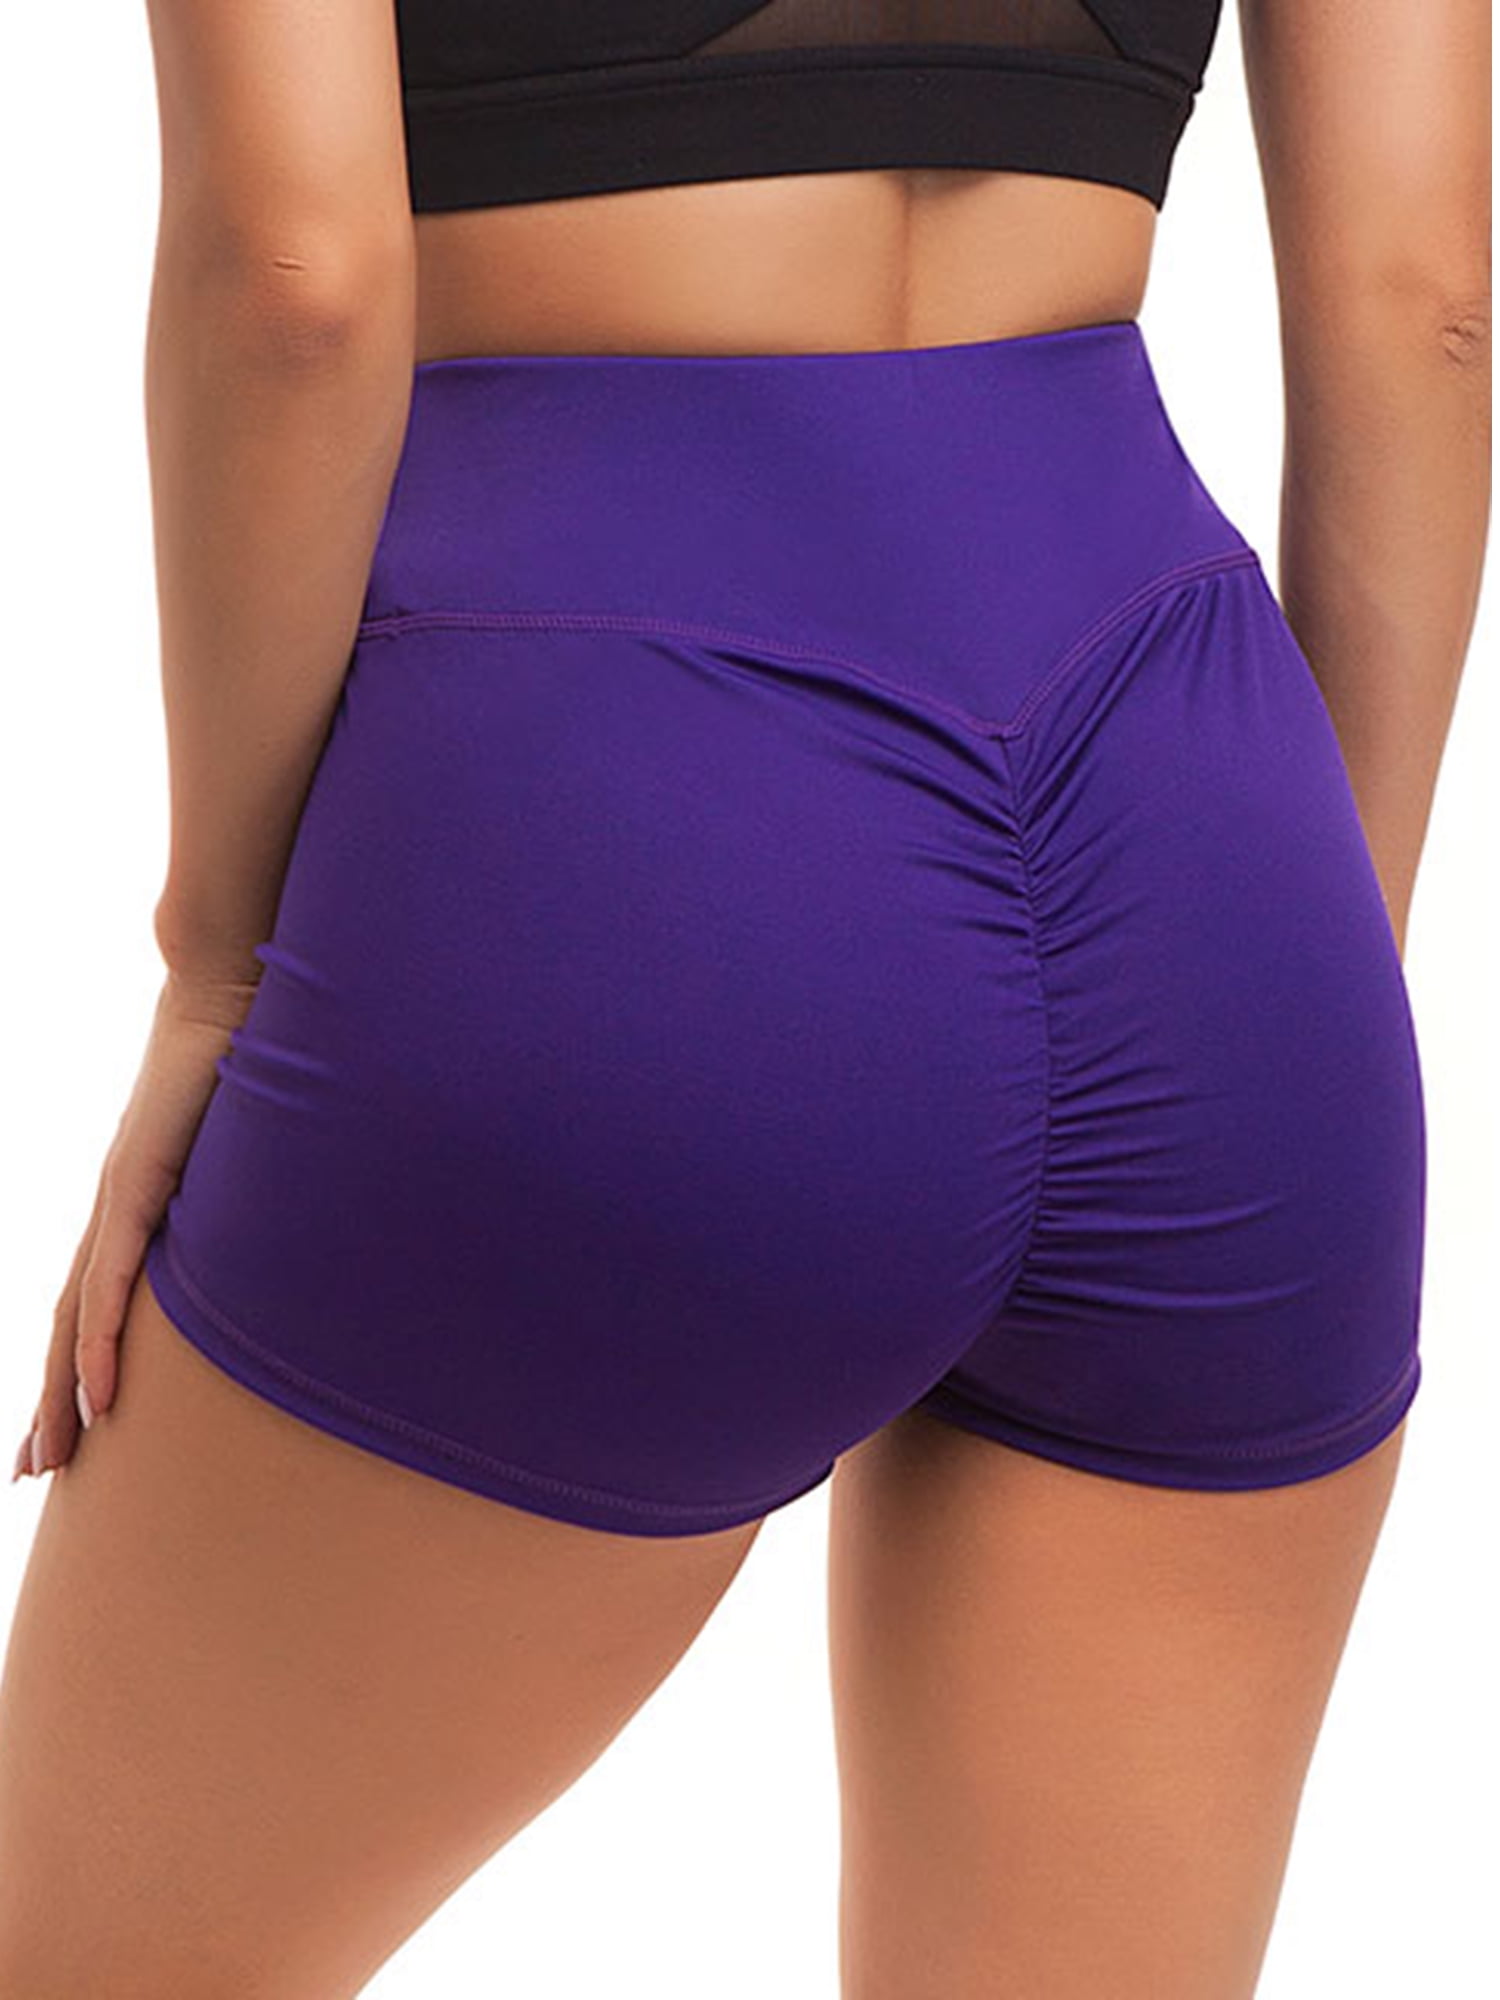 OFEEFAN Womens Shorts Workout Atheltic Booty Running Gym Yoga Butt Lift Shorts